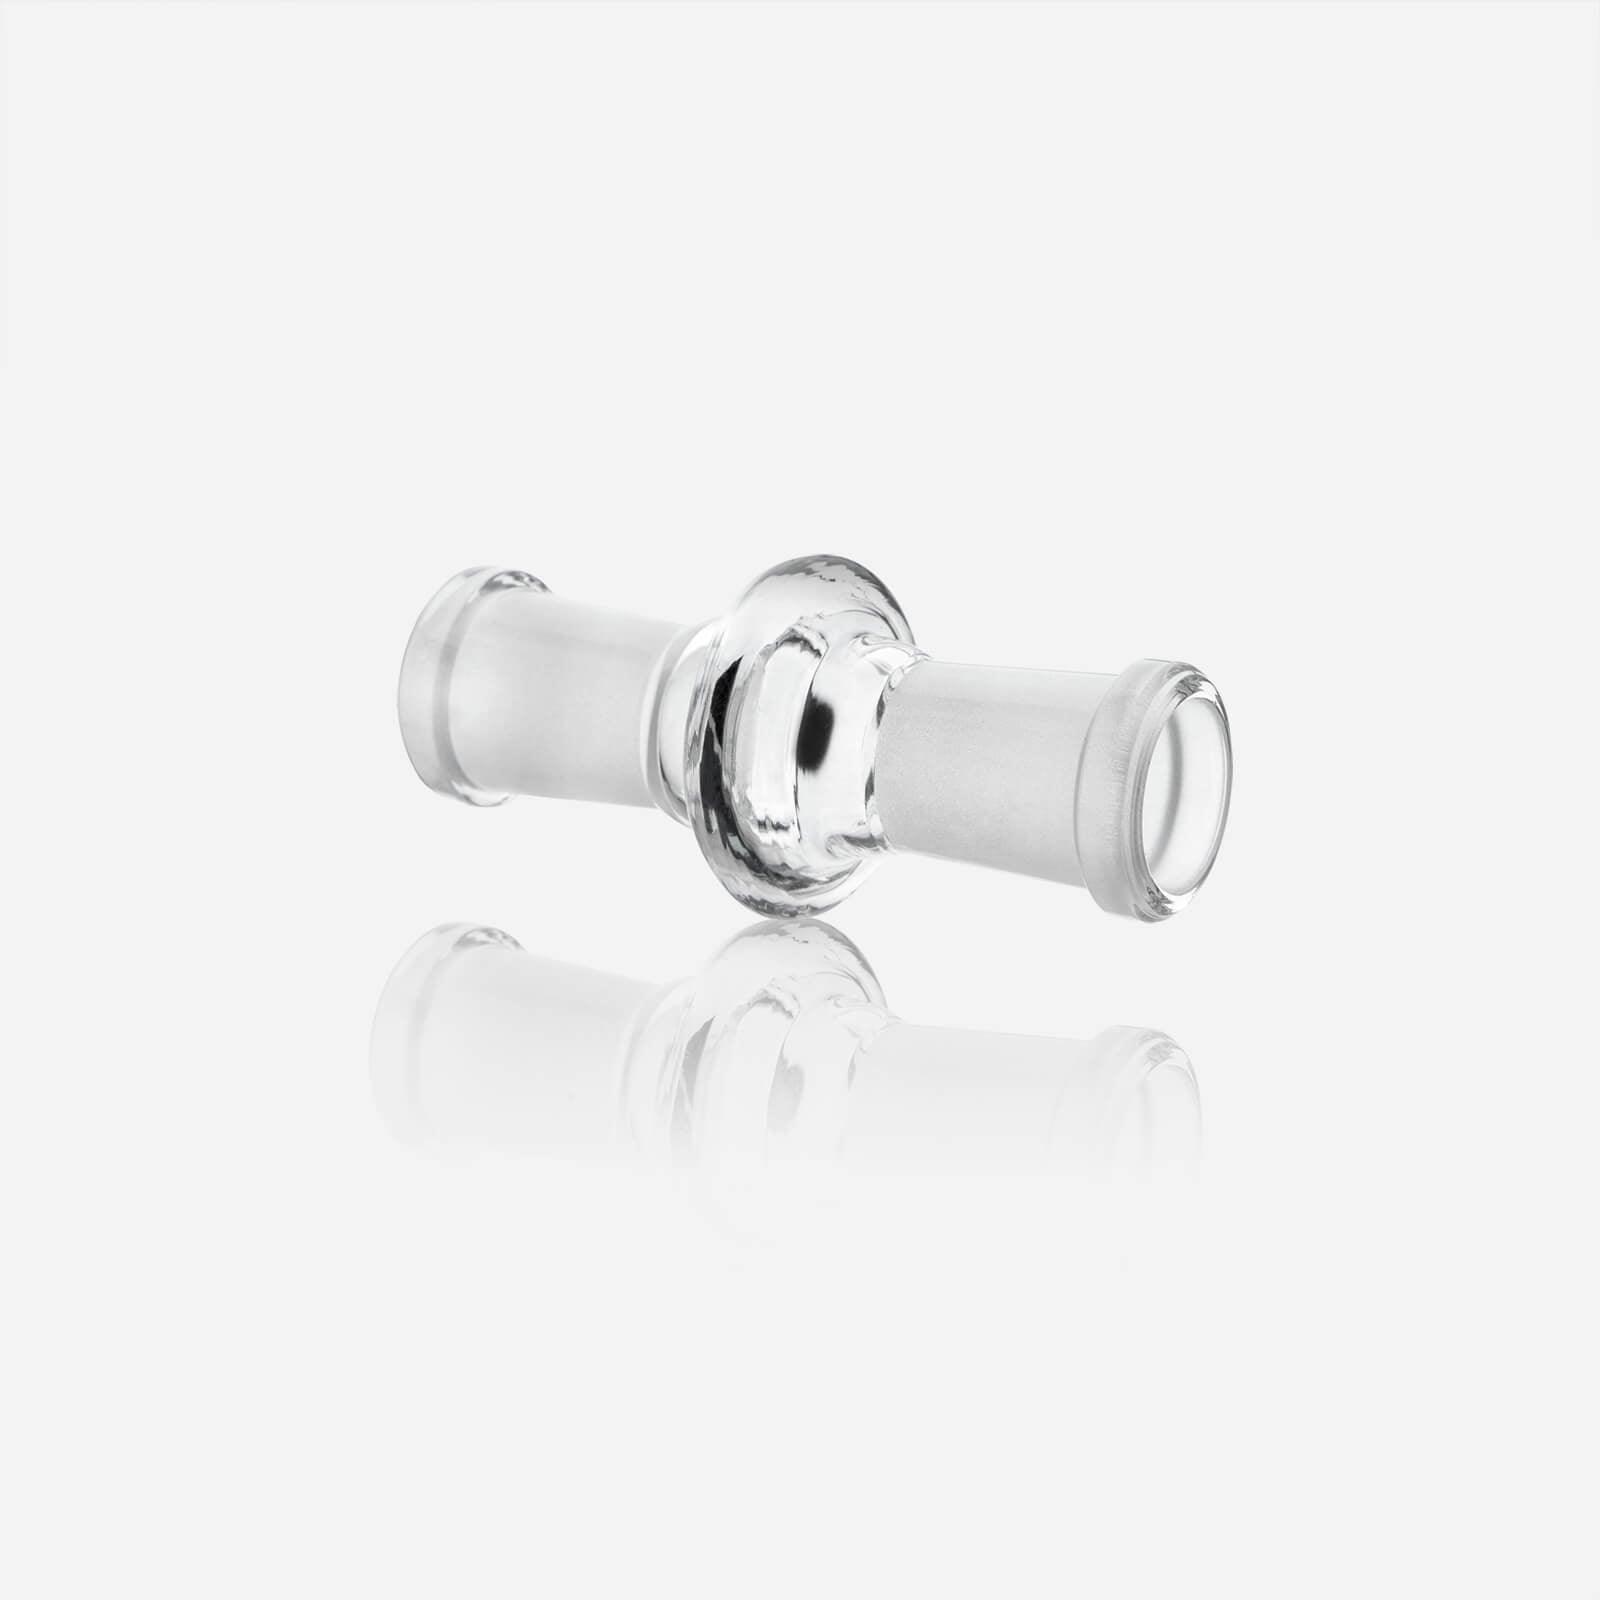 Glass Adapter 14mm Female to 14mm Female - PILOT DIARY